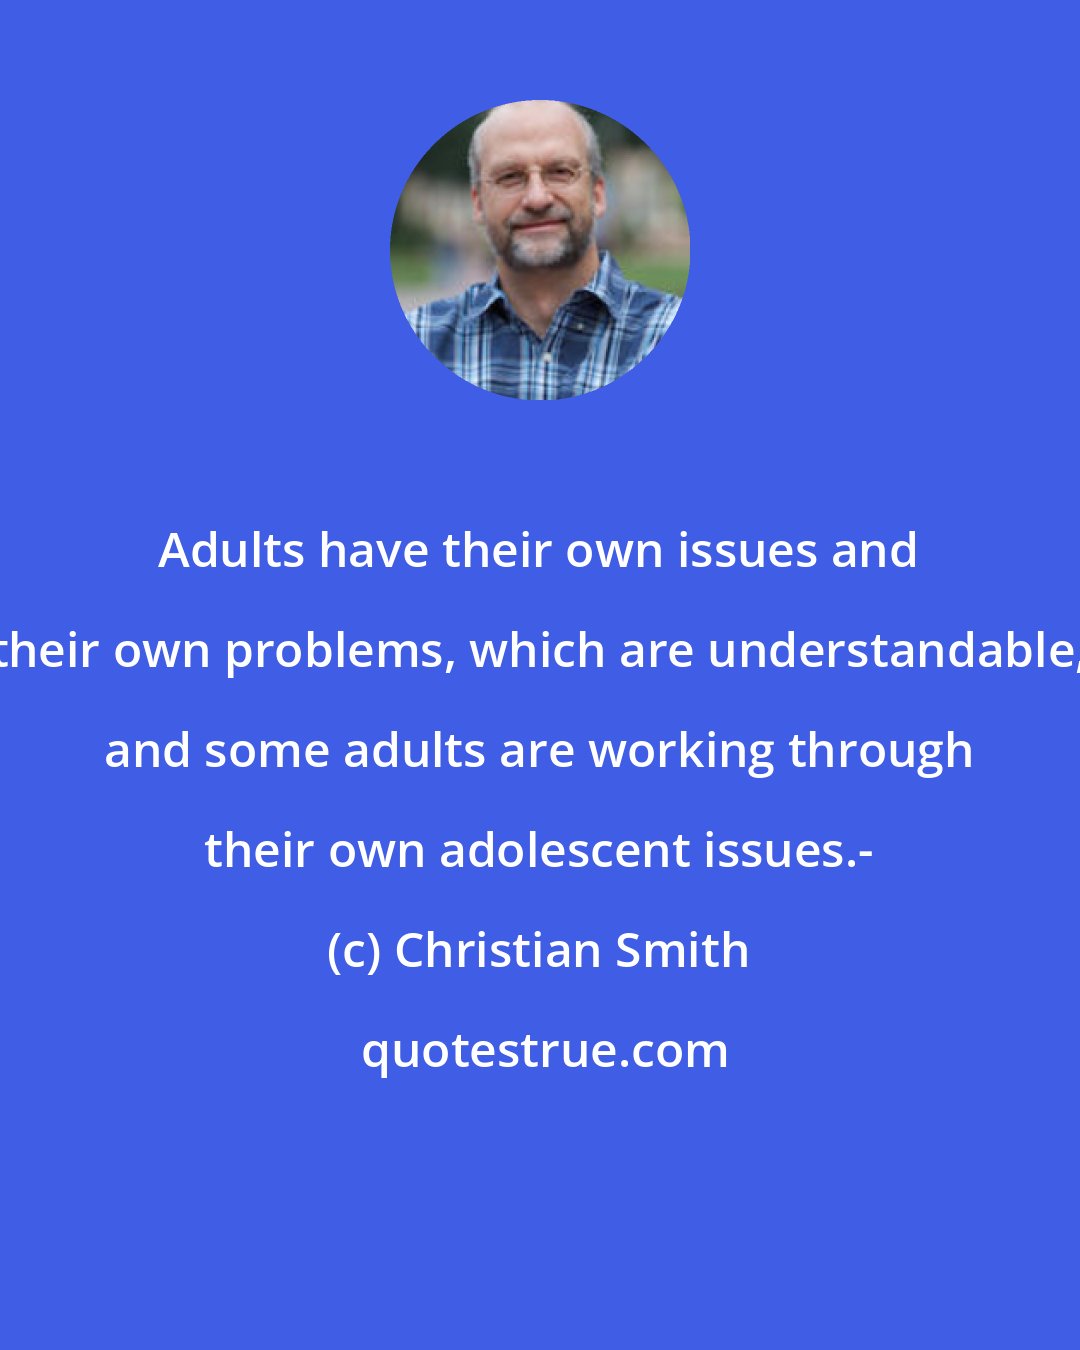 Christian Smith: Adults have their own issues and their own problems, which are understandable, and some adults are working through their own adolescent issues.-